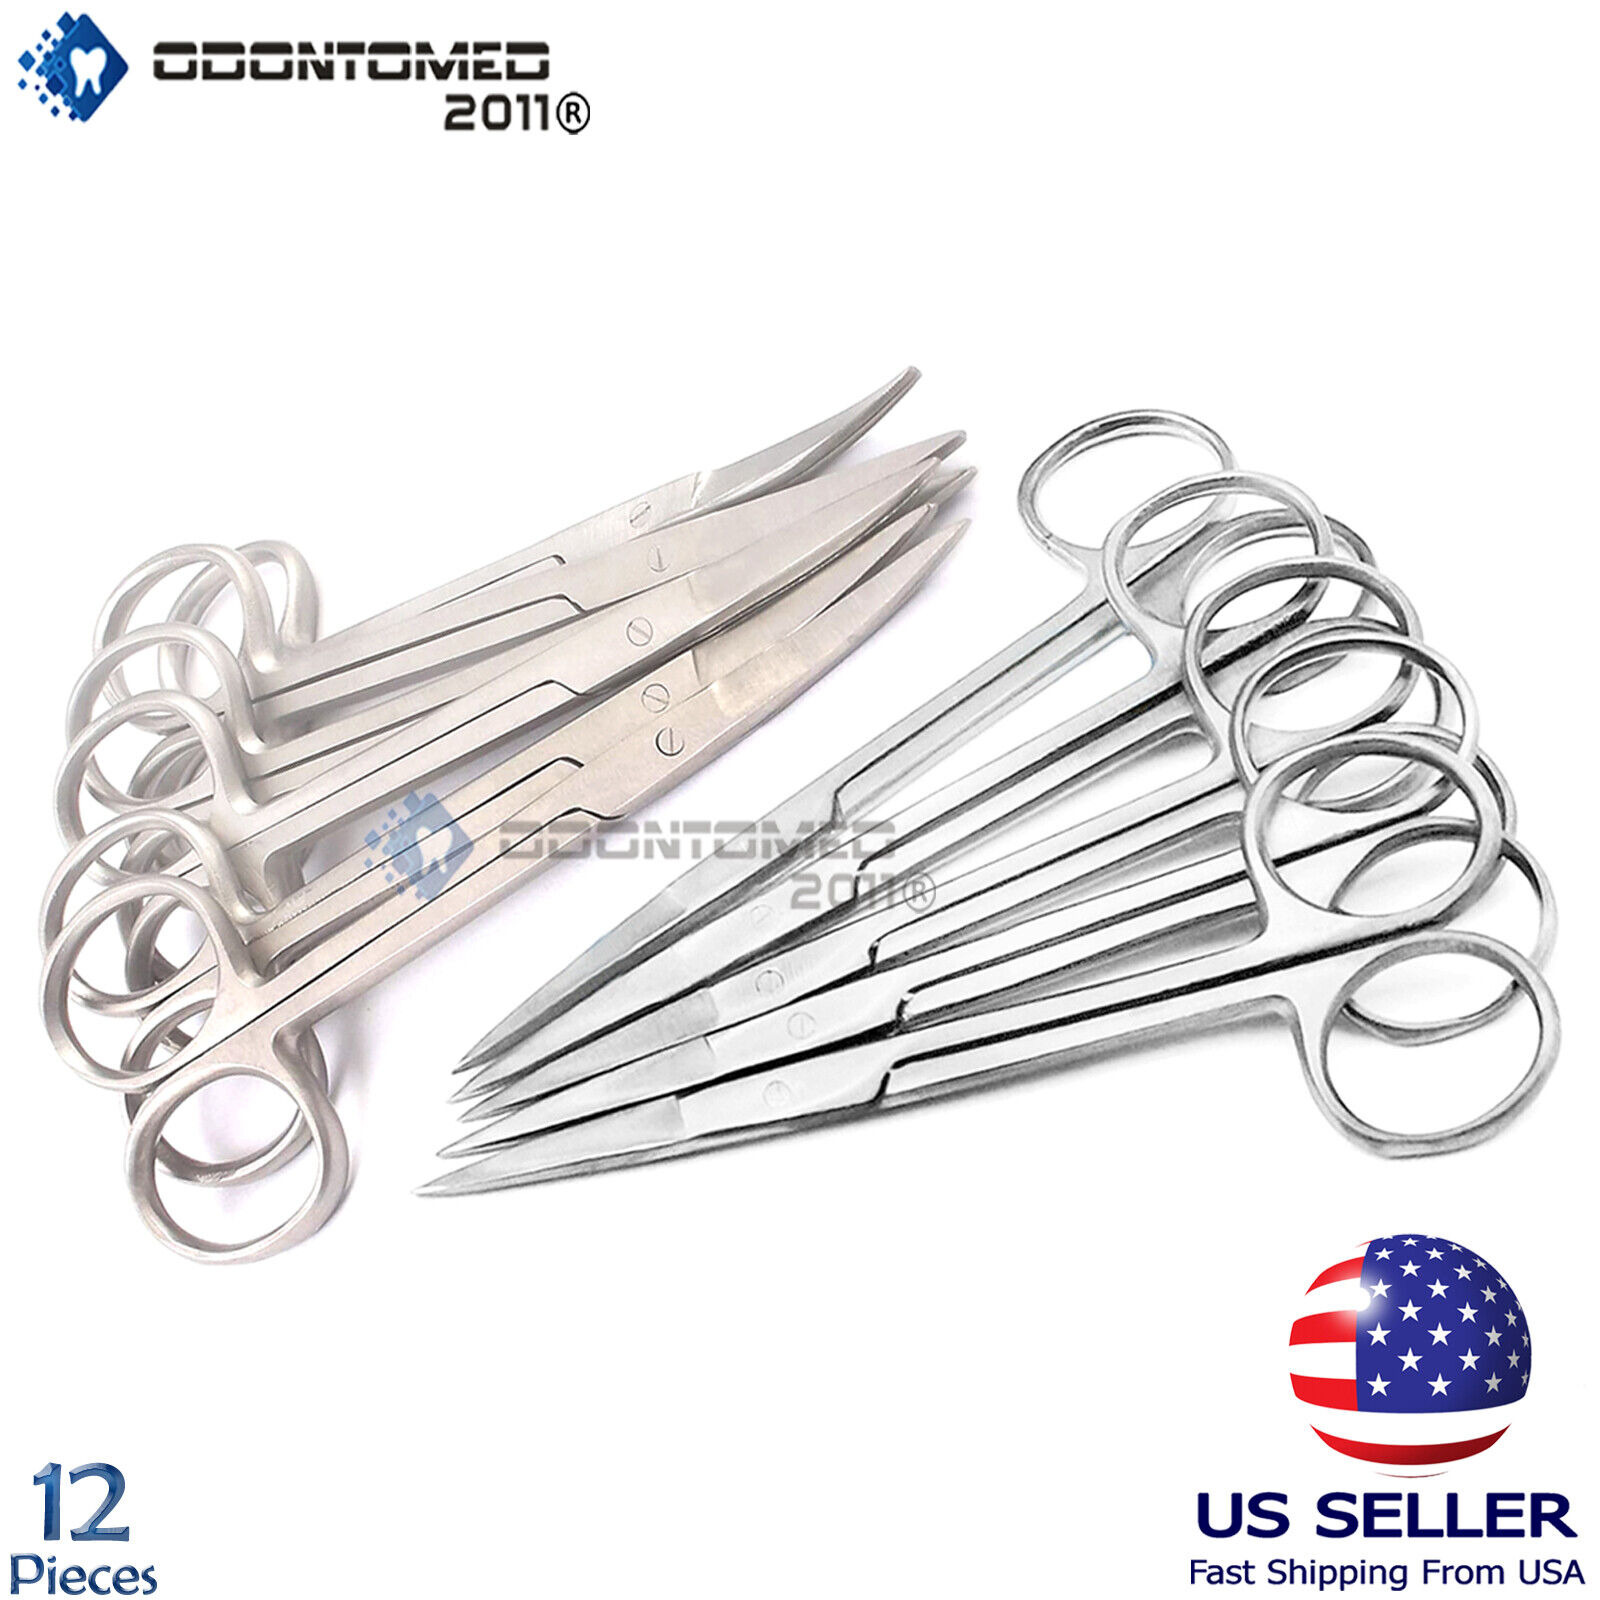 12 Iris Scissors 4.5" Curved & Straight Surgical Dental Instruments ODM Does Not Apply - фотография #2